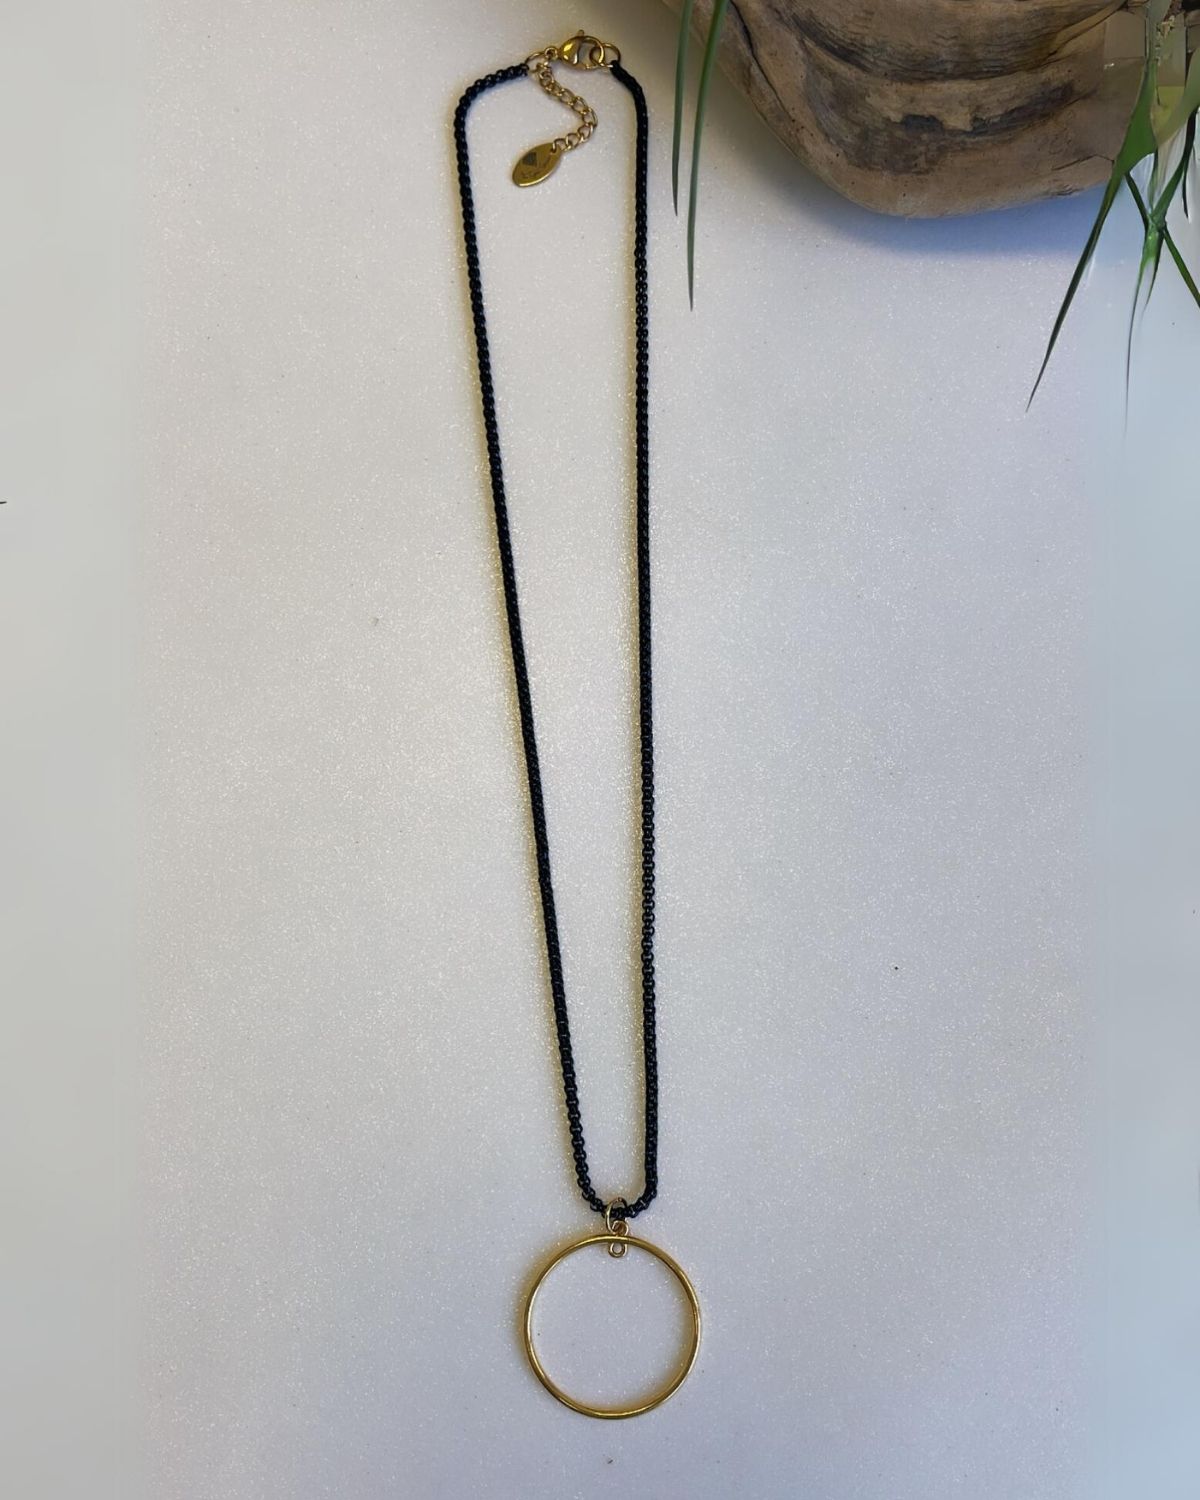 Necklace for hanging elements